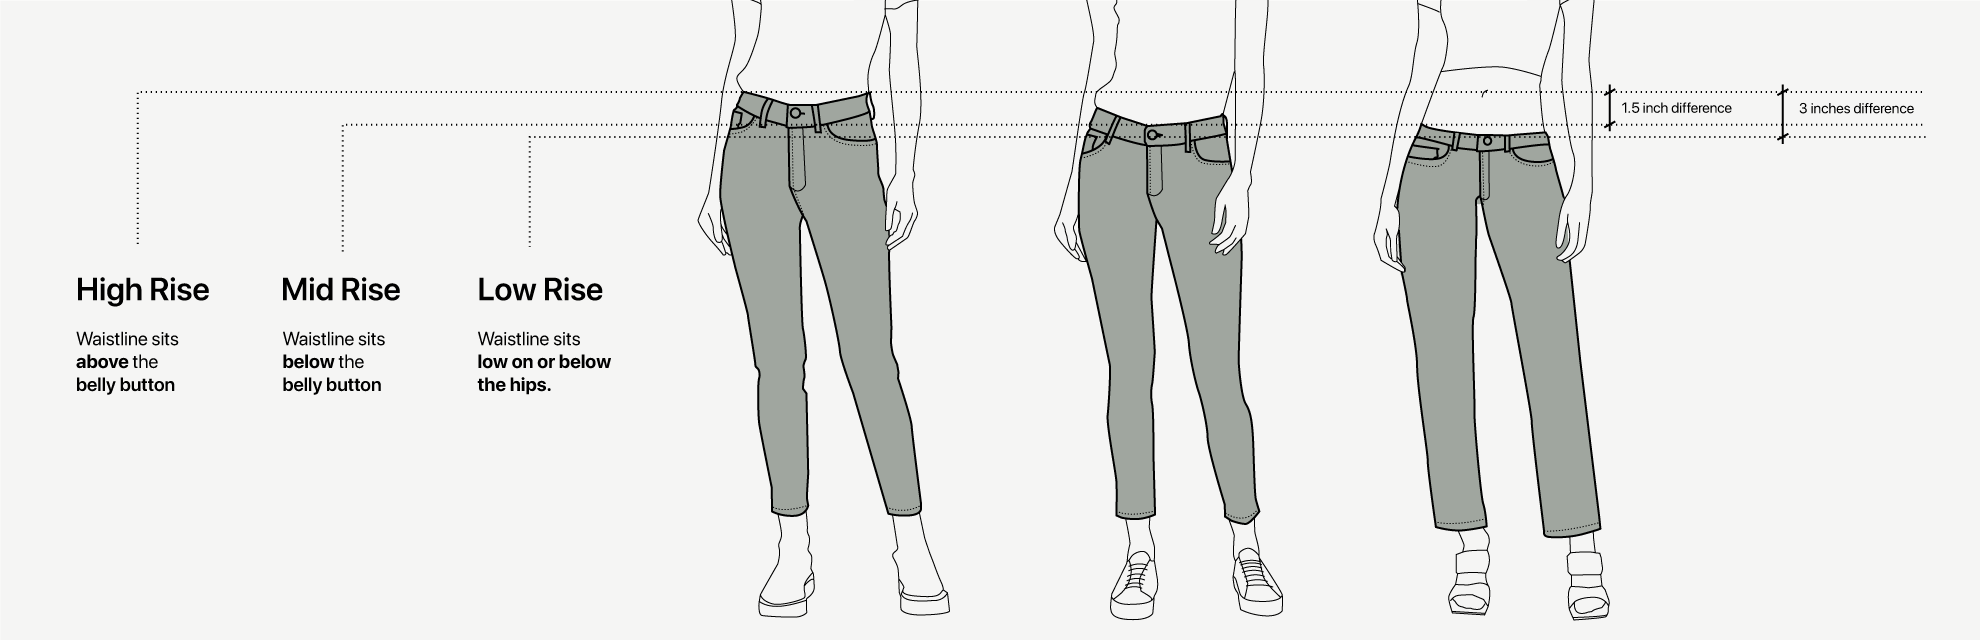 Different rises for women’s jeans: high (above the belly button), mid (below the belly button), and low (below the hips)